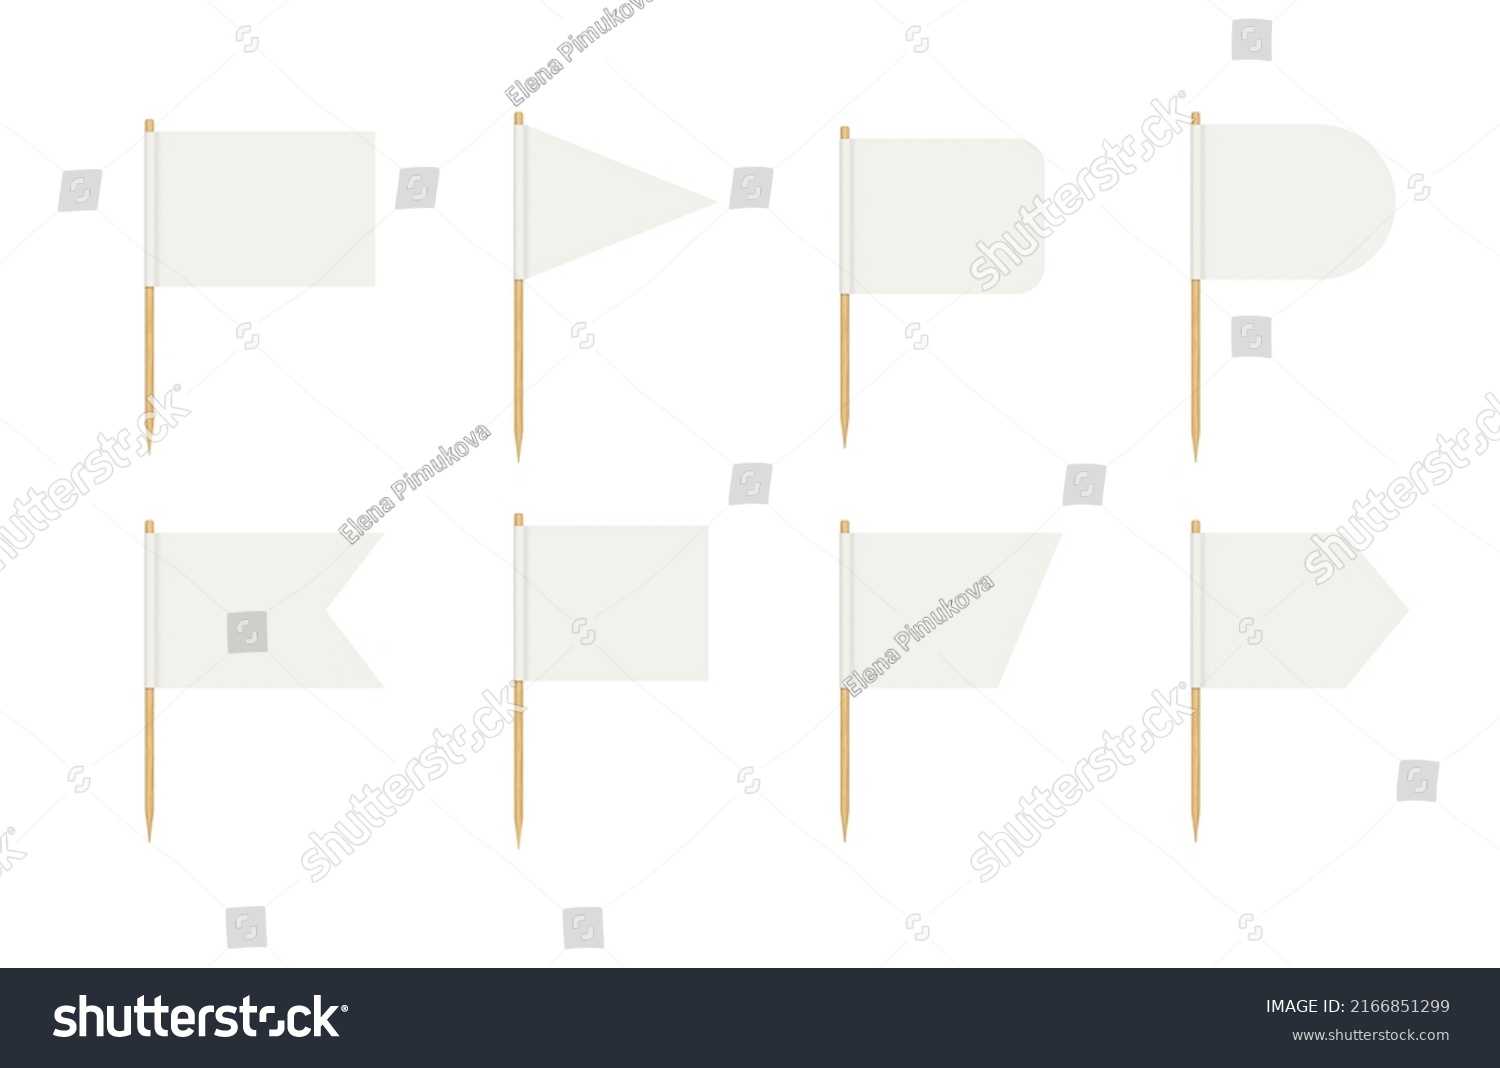 SVG of Toothpick flags. Blank flag on wooden stick. Wood toothpick with white paper banner for food and cocktail decoration. Different forms of pennant. Realistic 3d vector isolated on white background. svg